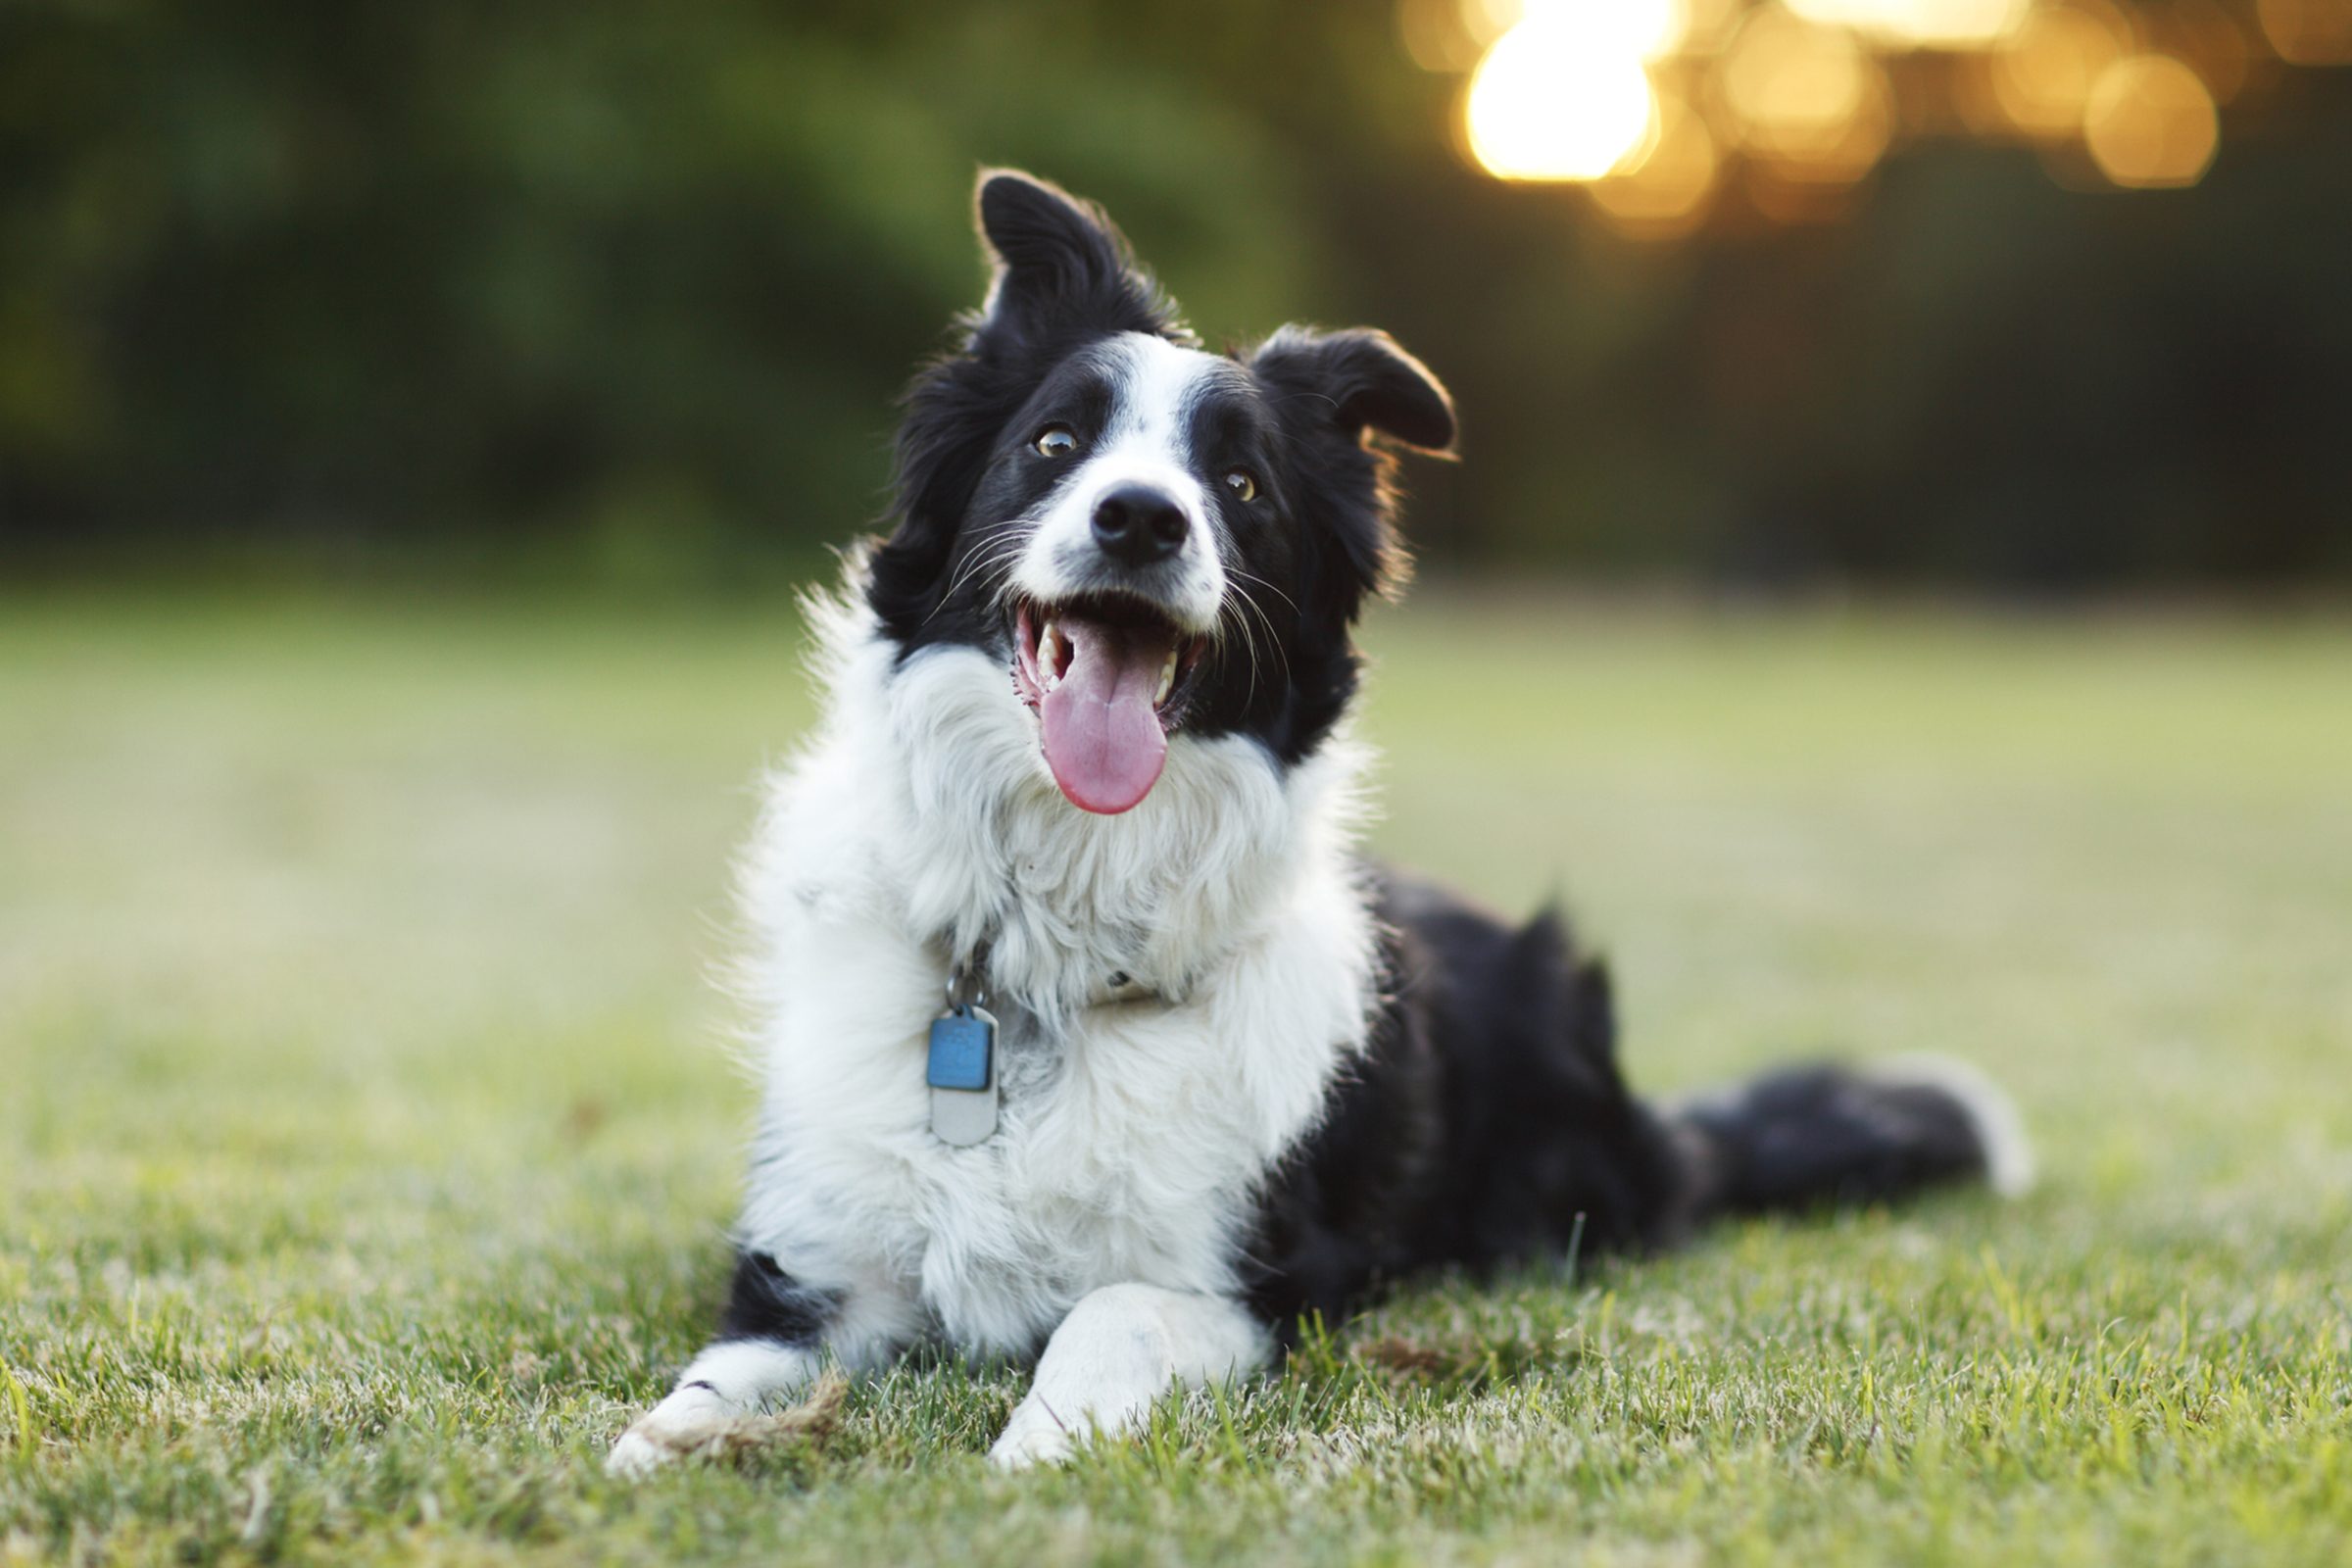 A happy border collie dog lays down on grass with its tongue out outdoors